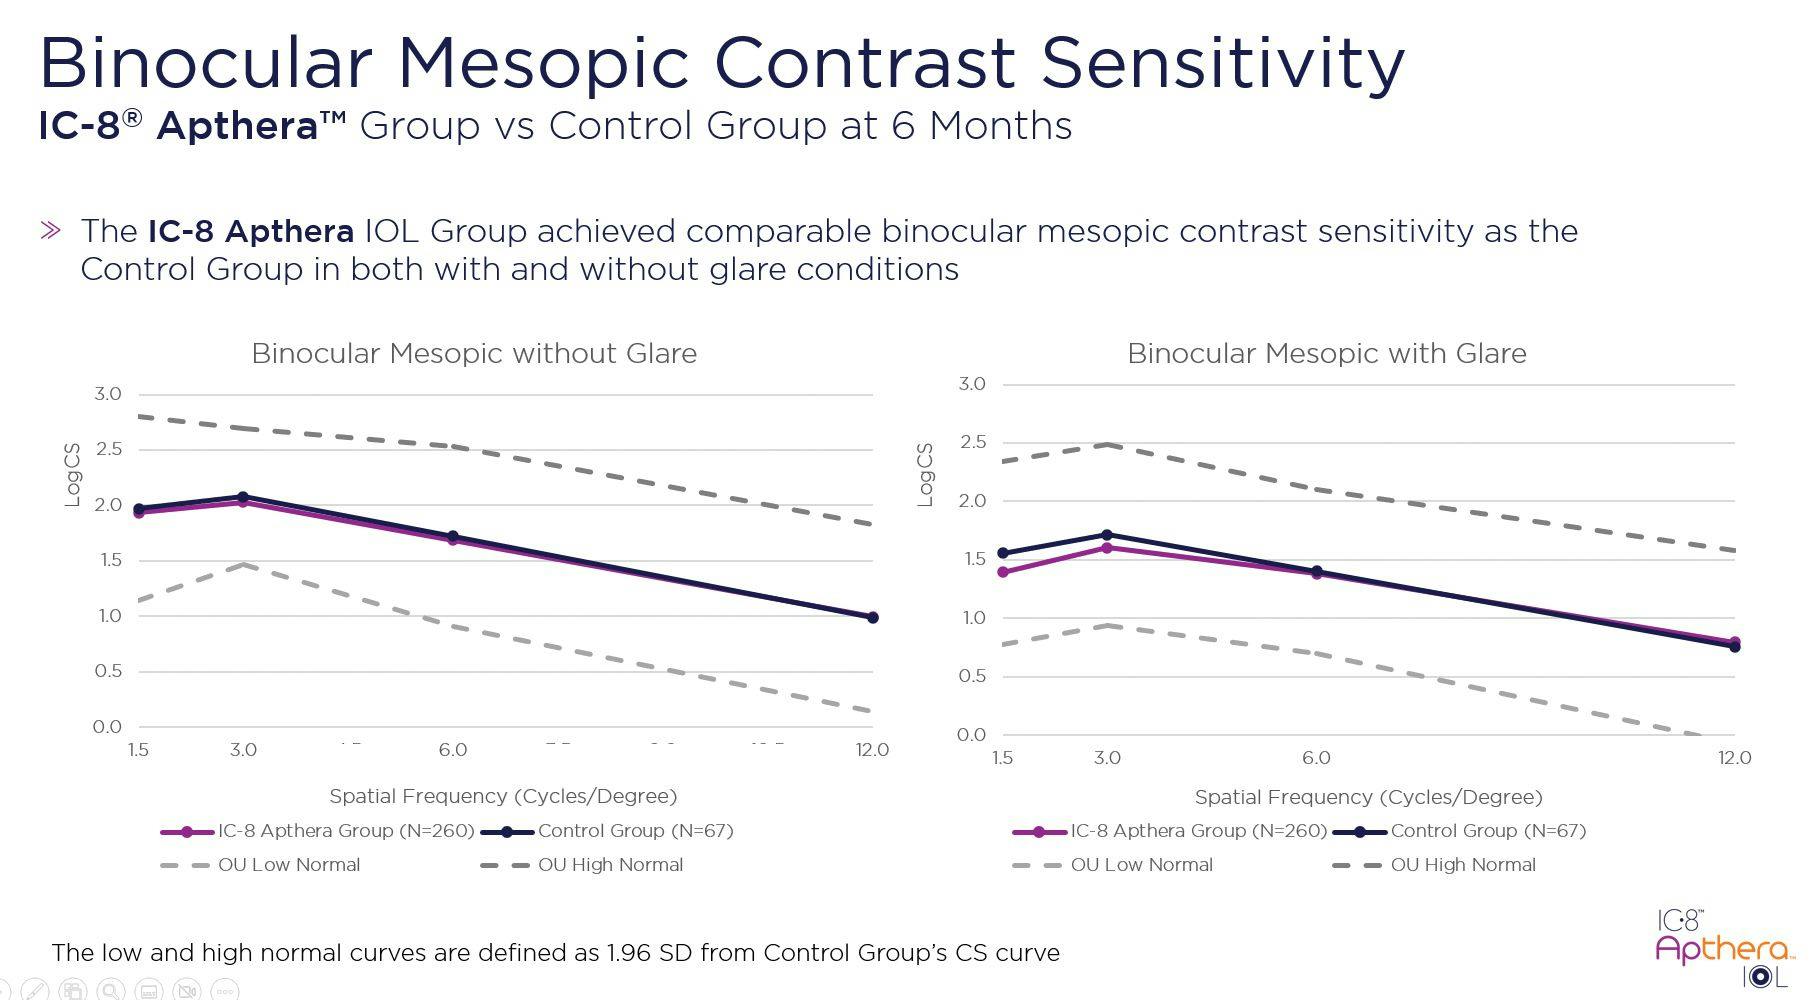 Figure 4. Binocular mesopic contrast sensitivity in both with and without glare conditions for Apthera IOL patients vs control group patients with bilateral monofocal IOLs. (Images courtesy of AcuFocus)